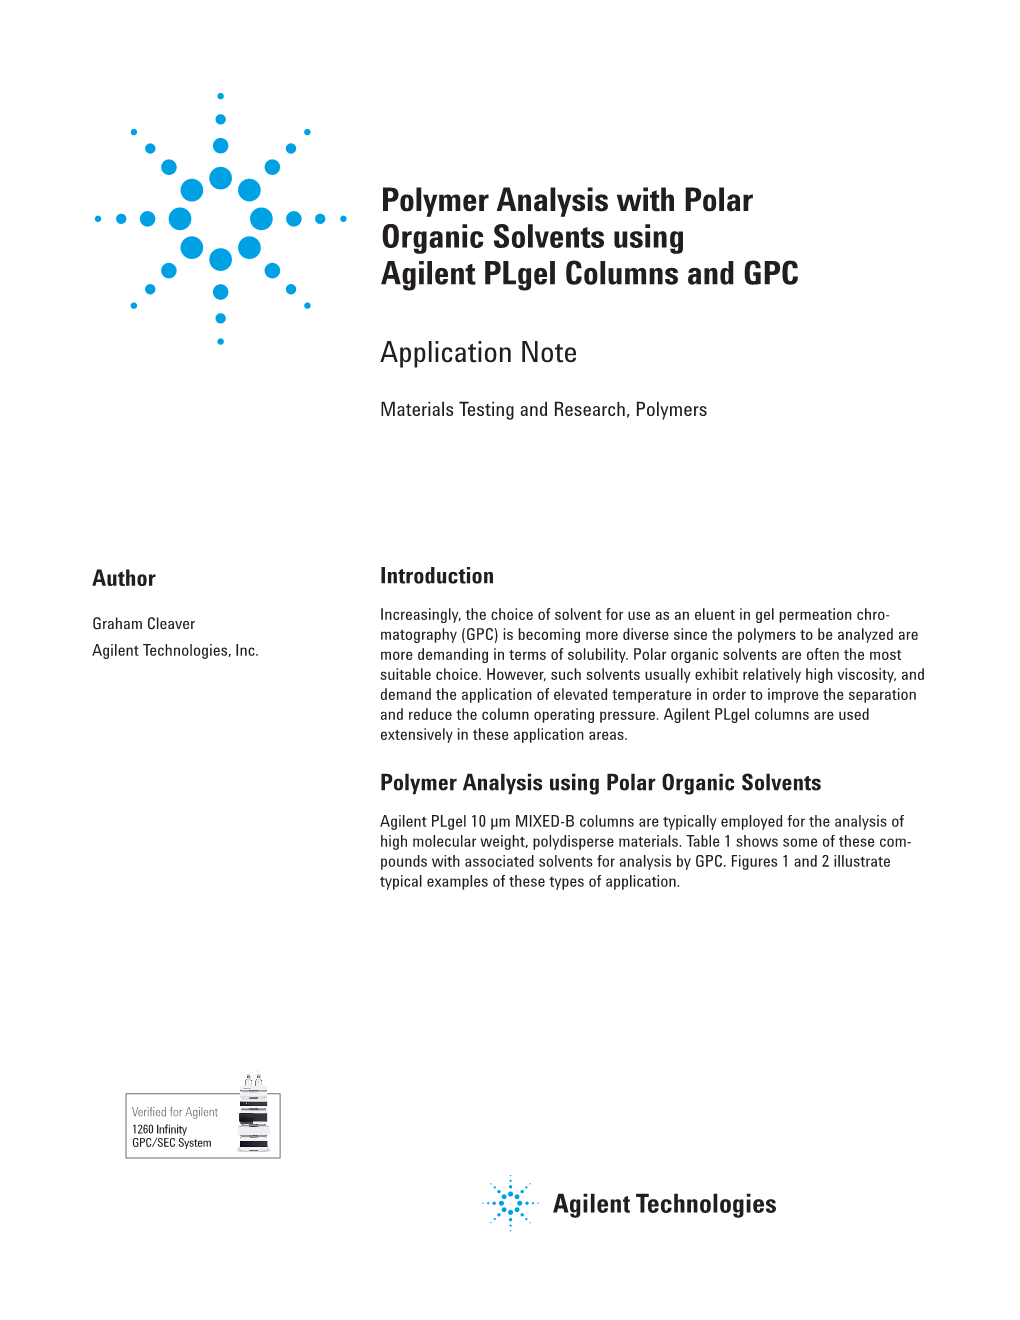 Polymer Analysis with Polar Organic Solvents Using Agilent Plgel Columns and GPC